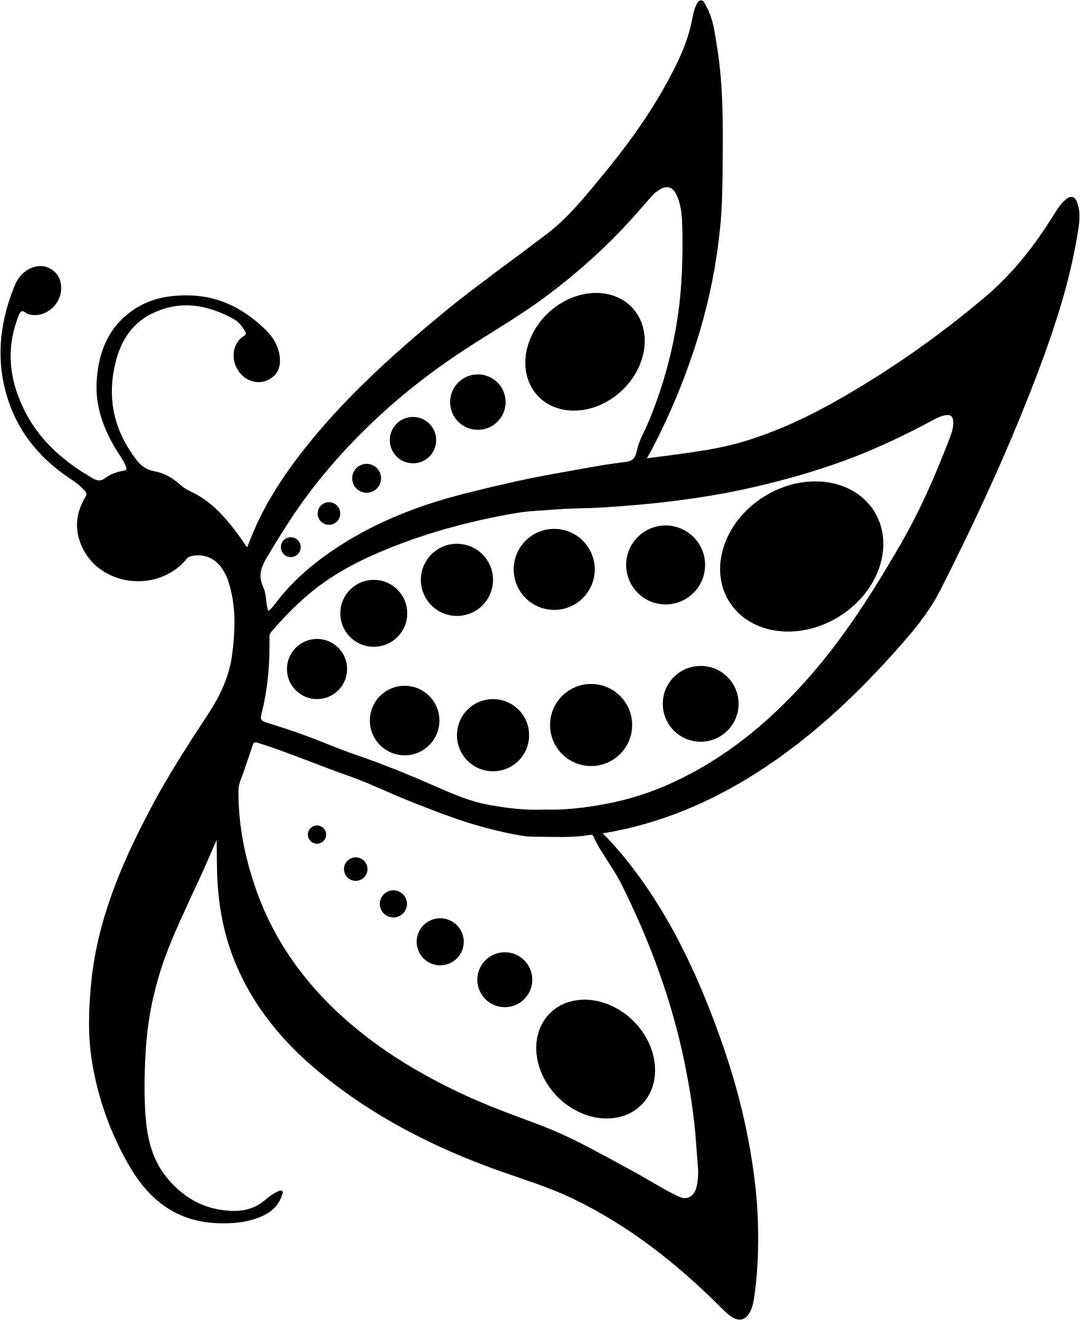 Spotted Butterfly Silhouette png transparent